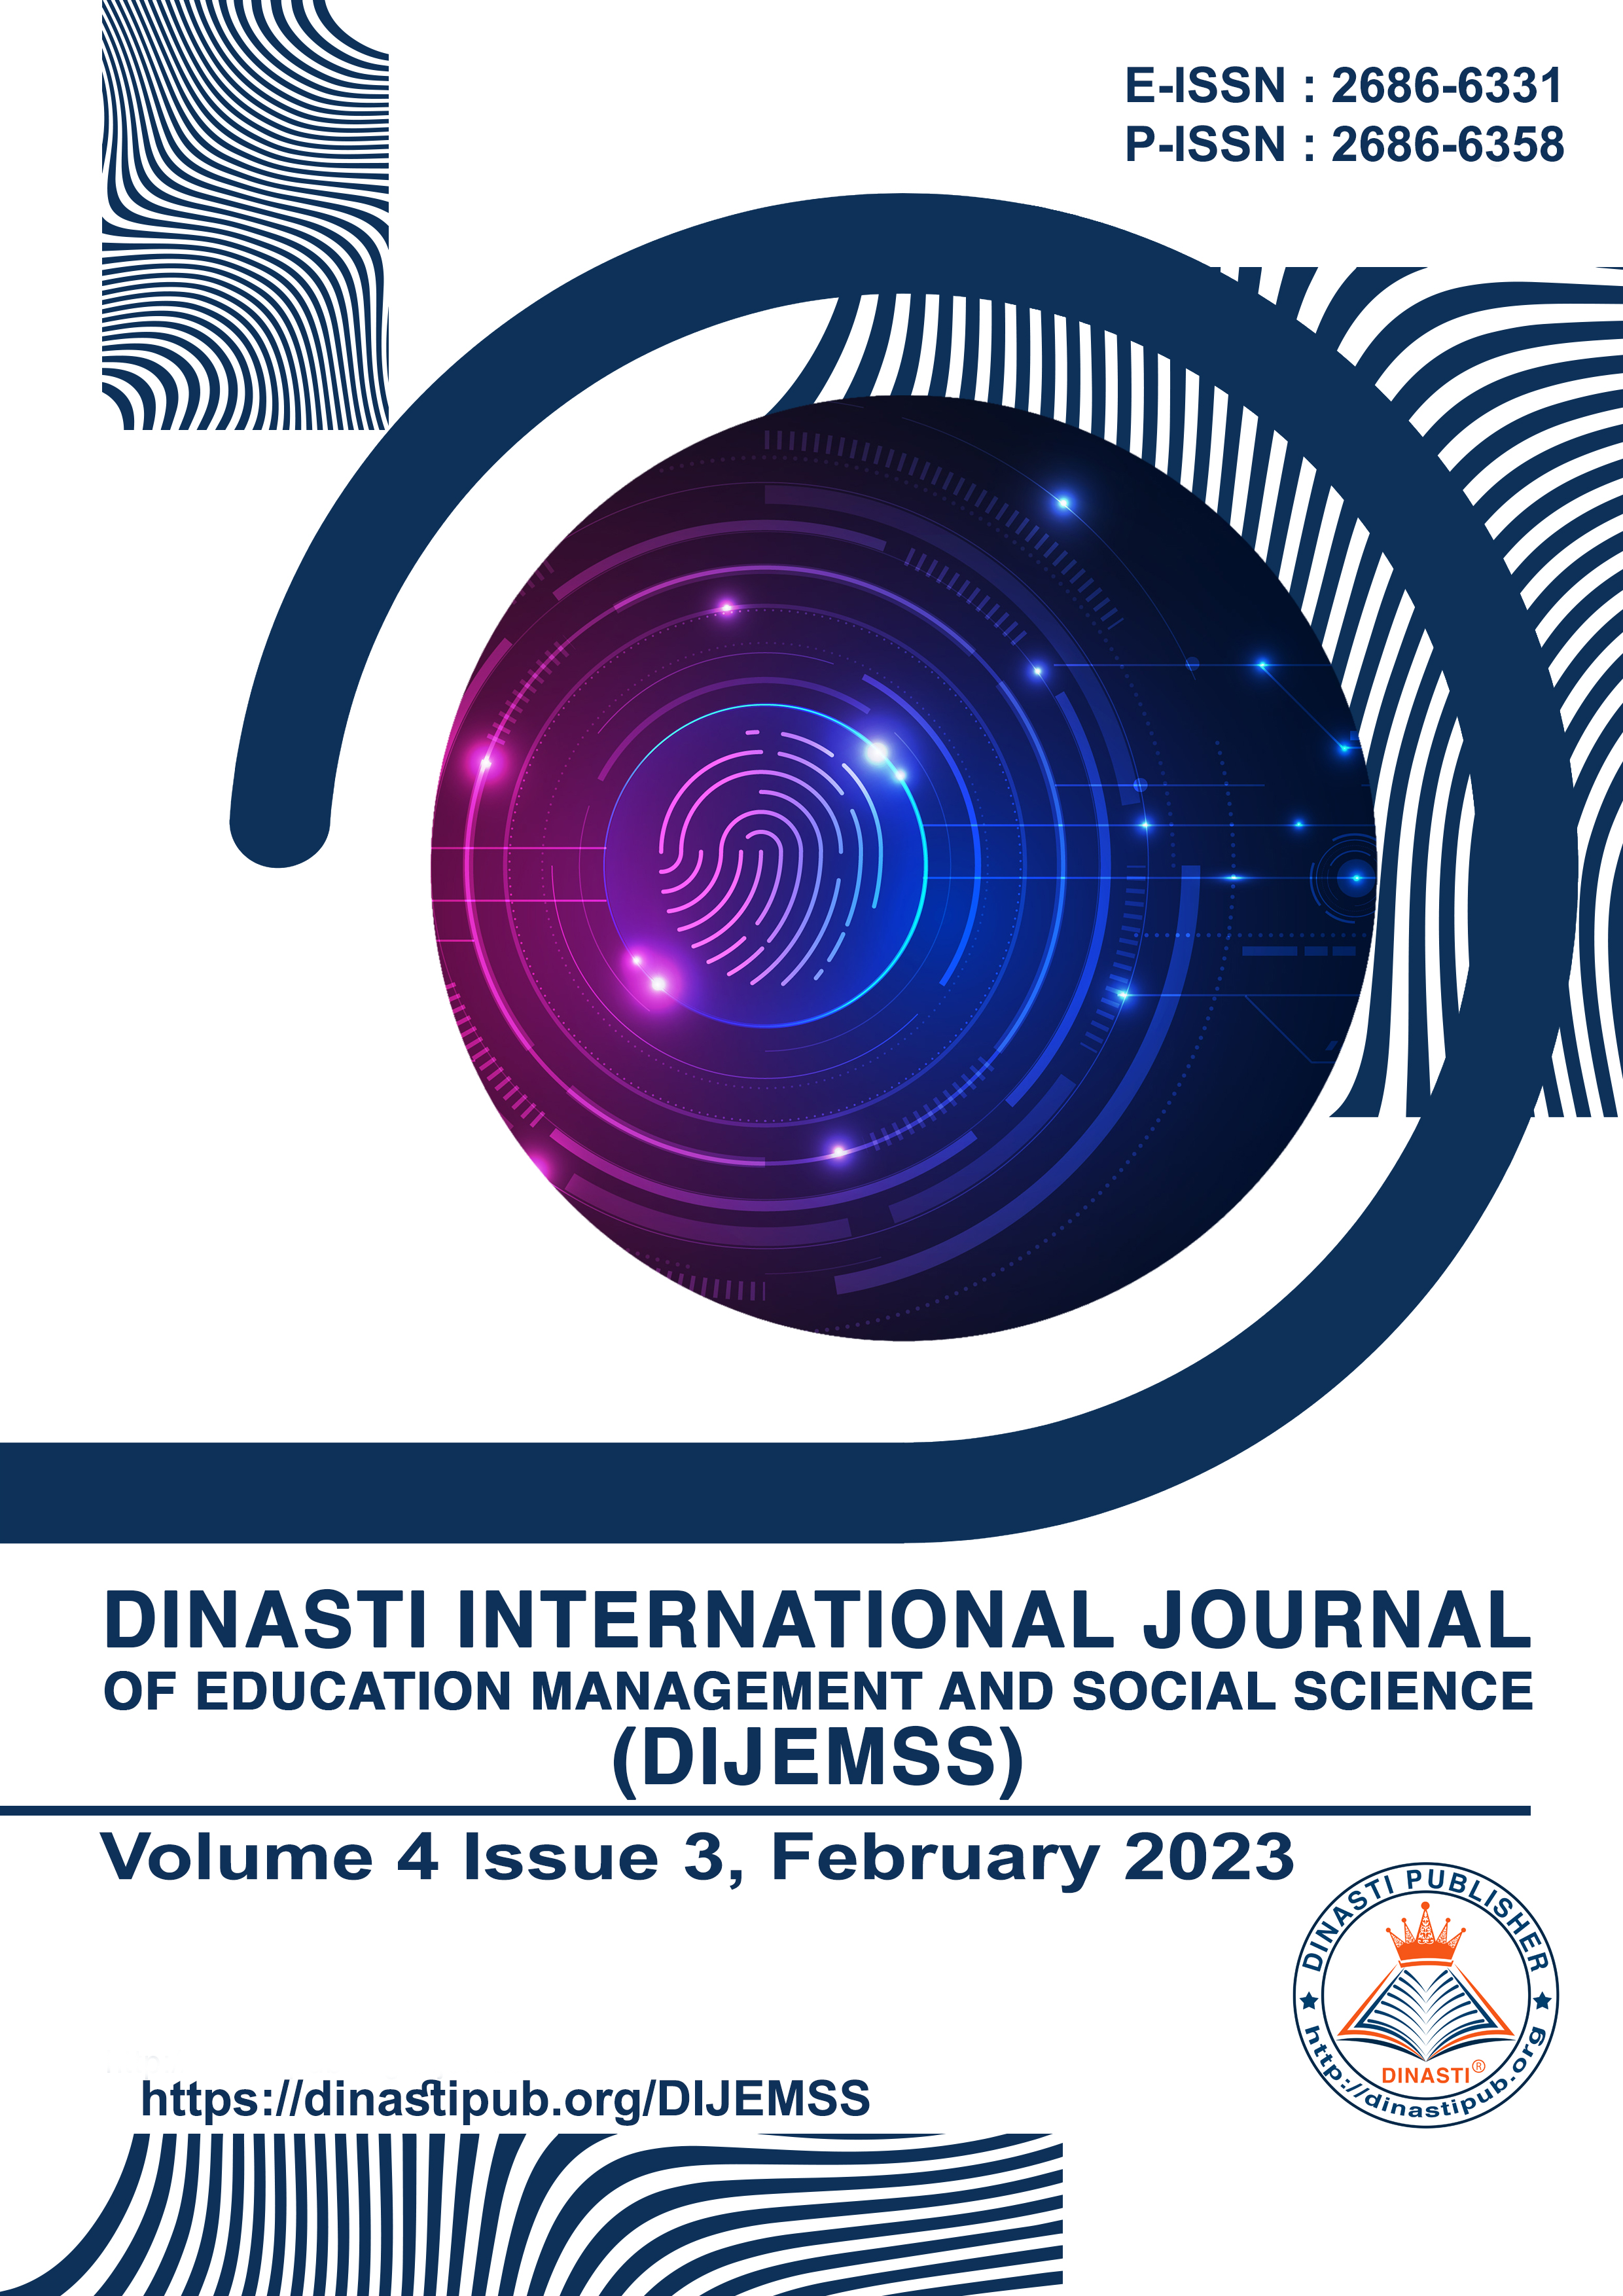 					View Vol. 4 No. 3 (2023): Dinasti International Journal of Education Management and Social Science (February - March 2023)
				